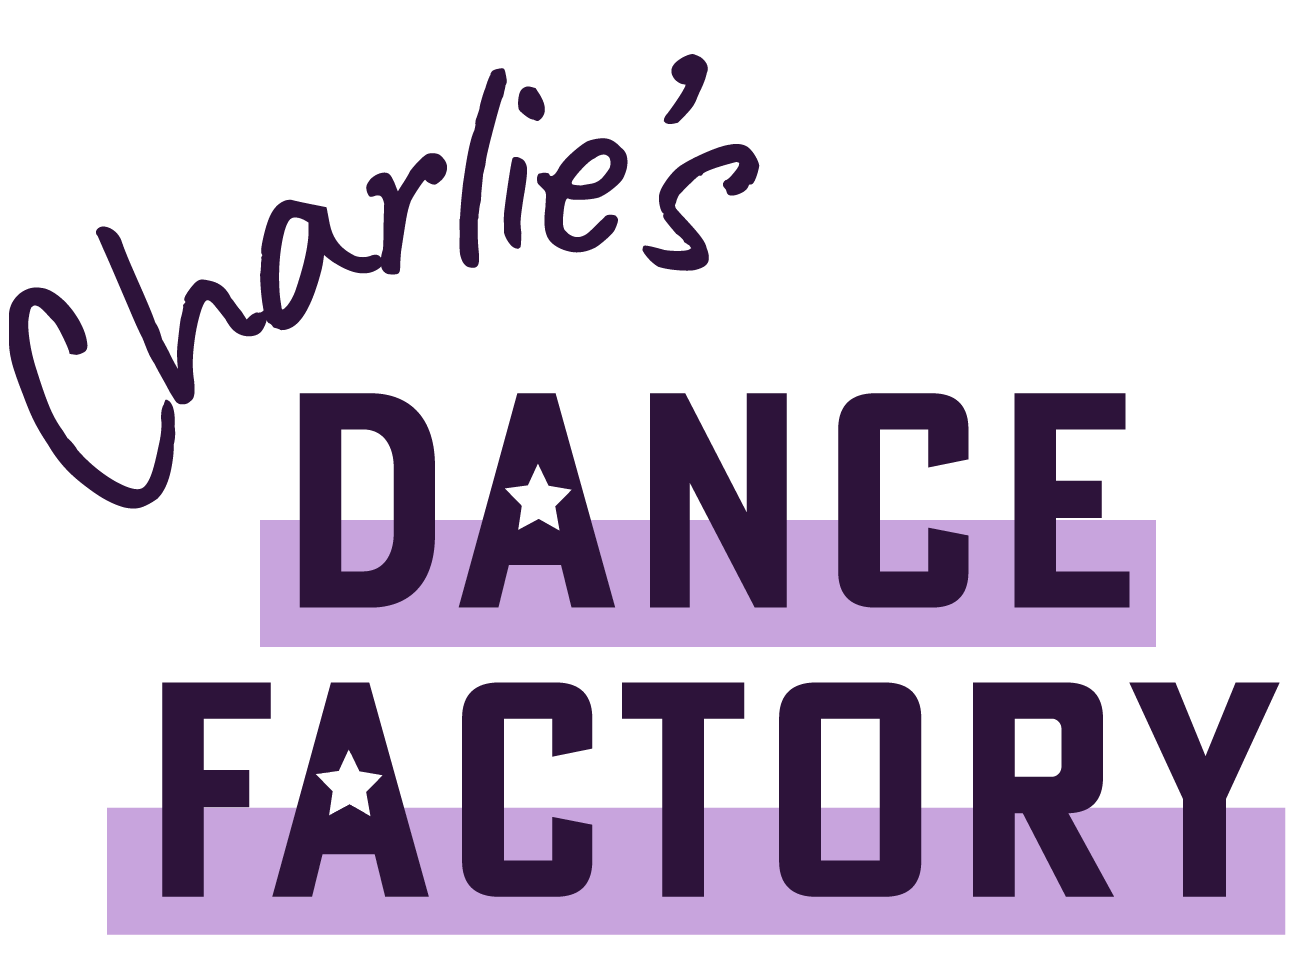 Charlie's Dance Factory